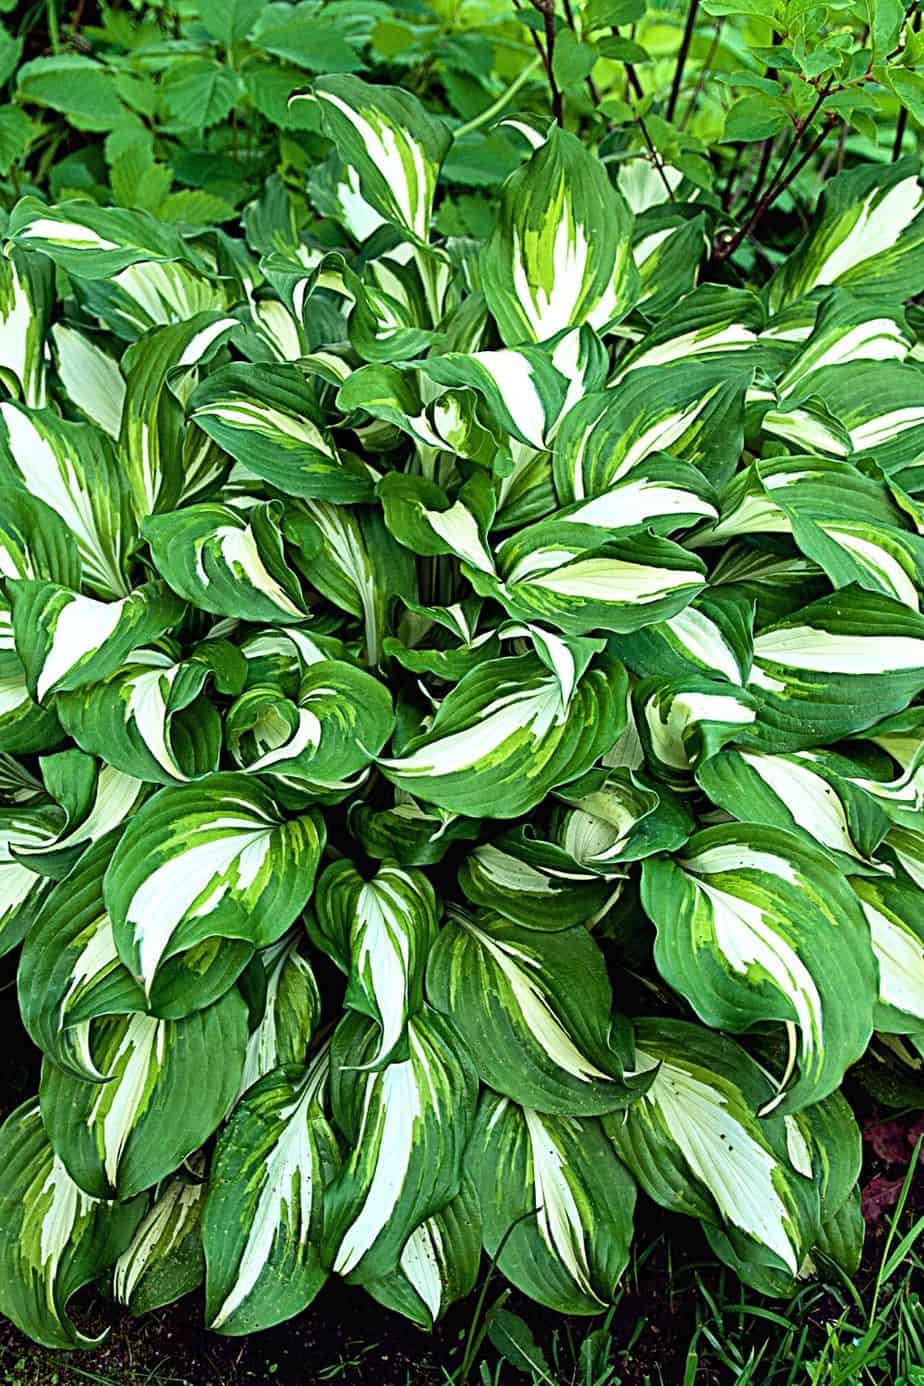 Hosta is a popular USA plant grown in households as it thrives in shady areas like north facing balconies 